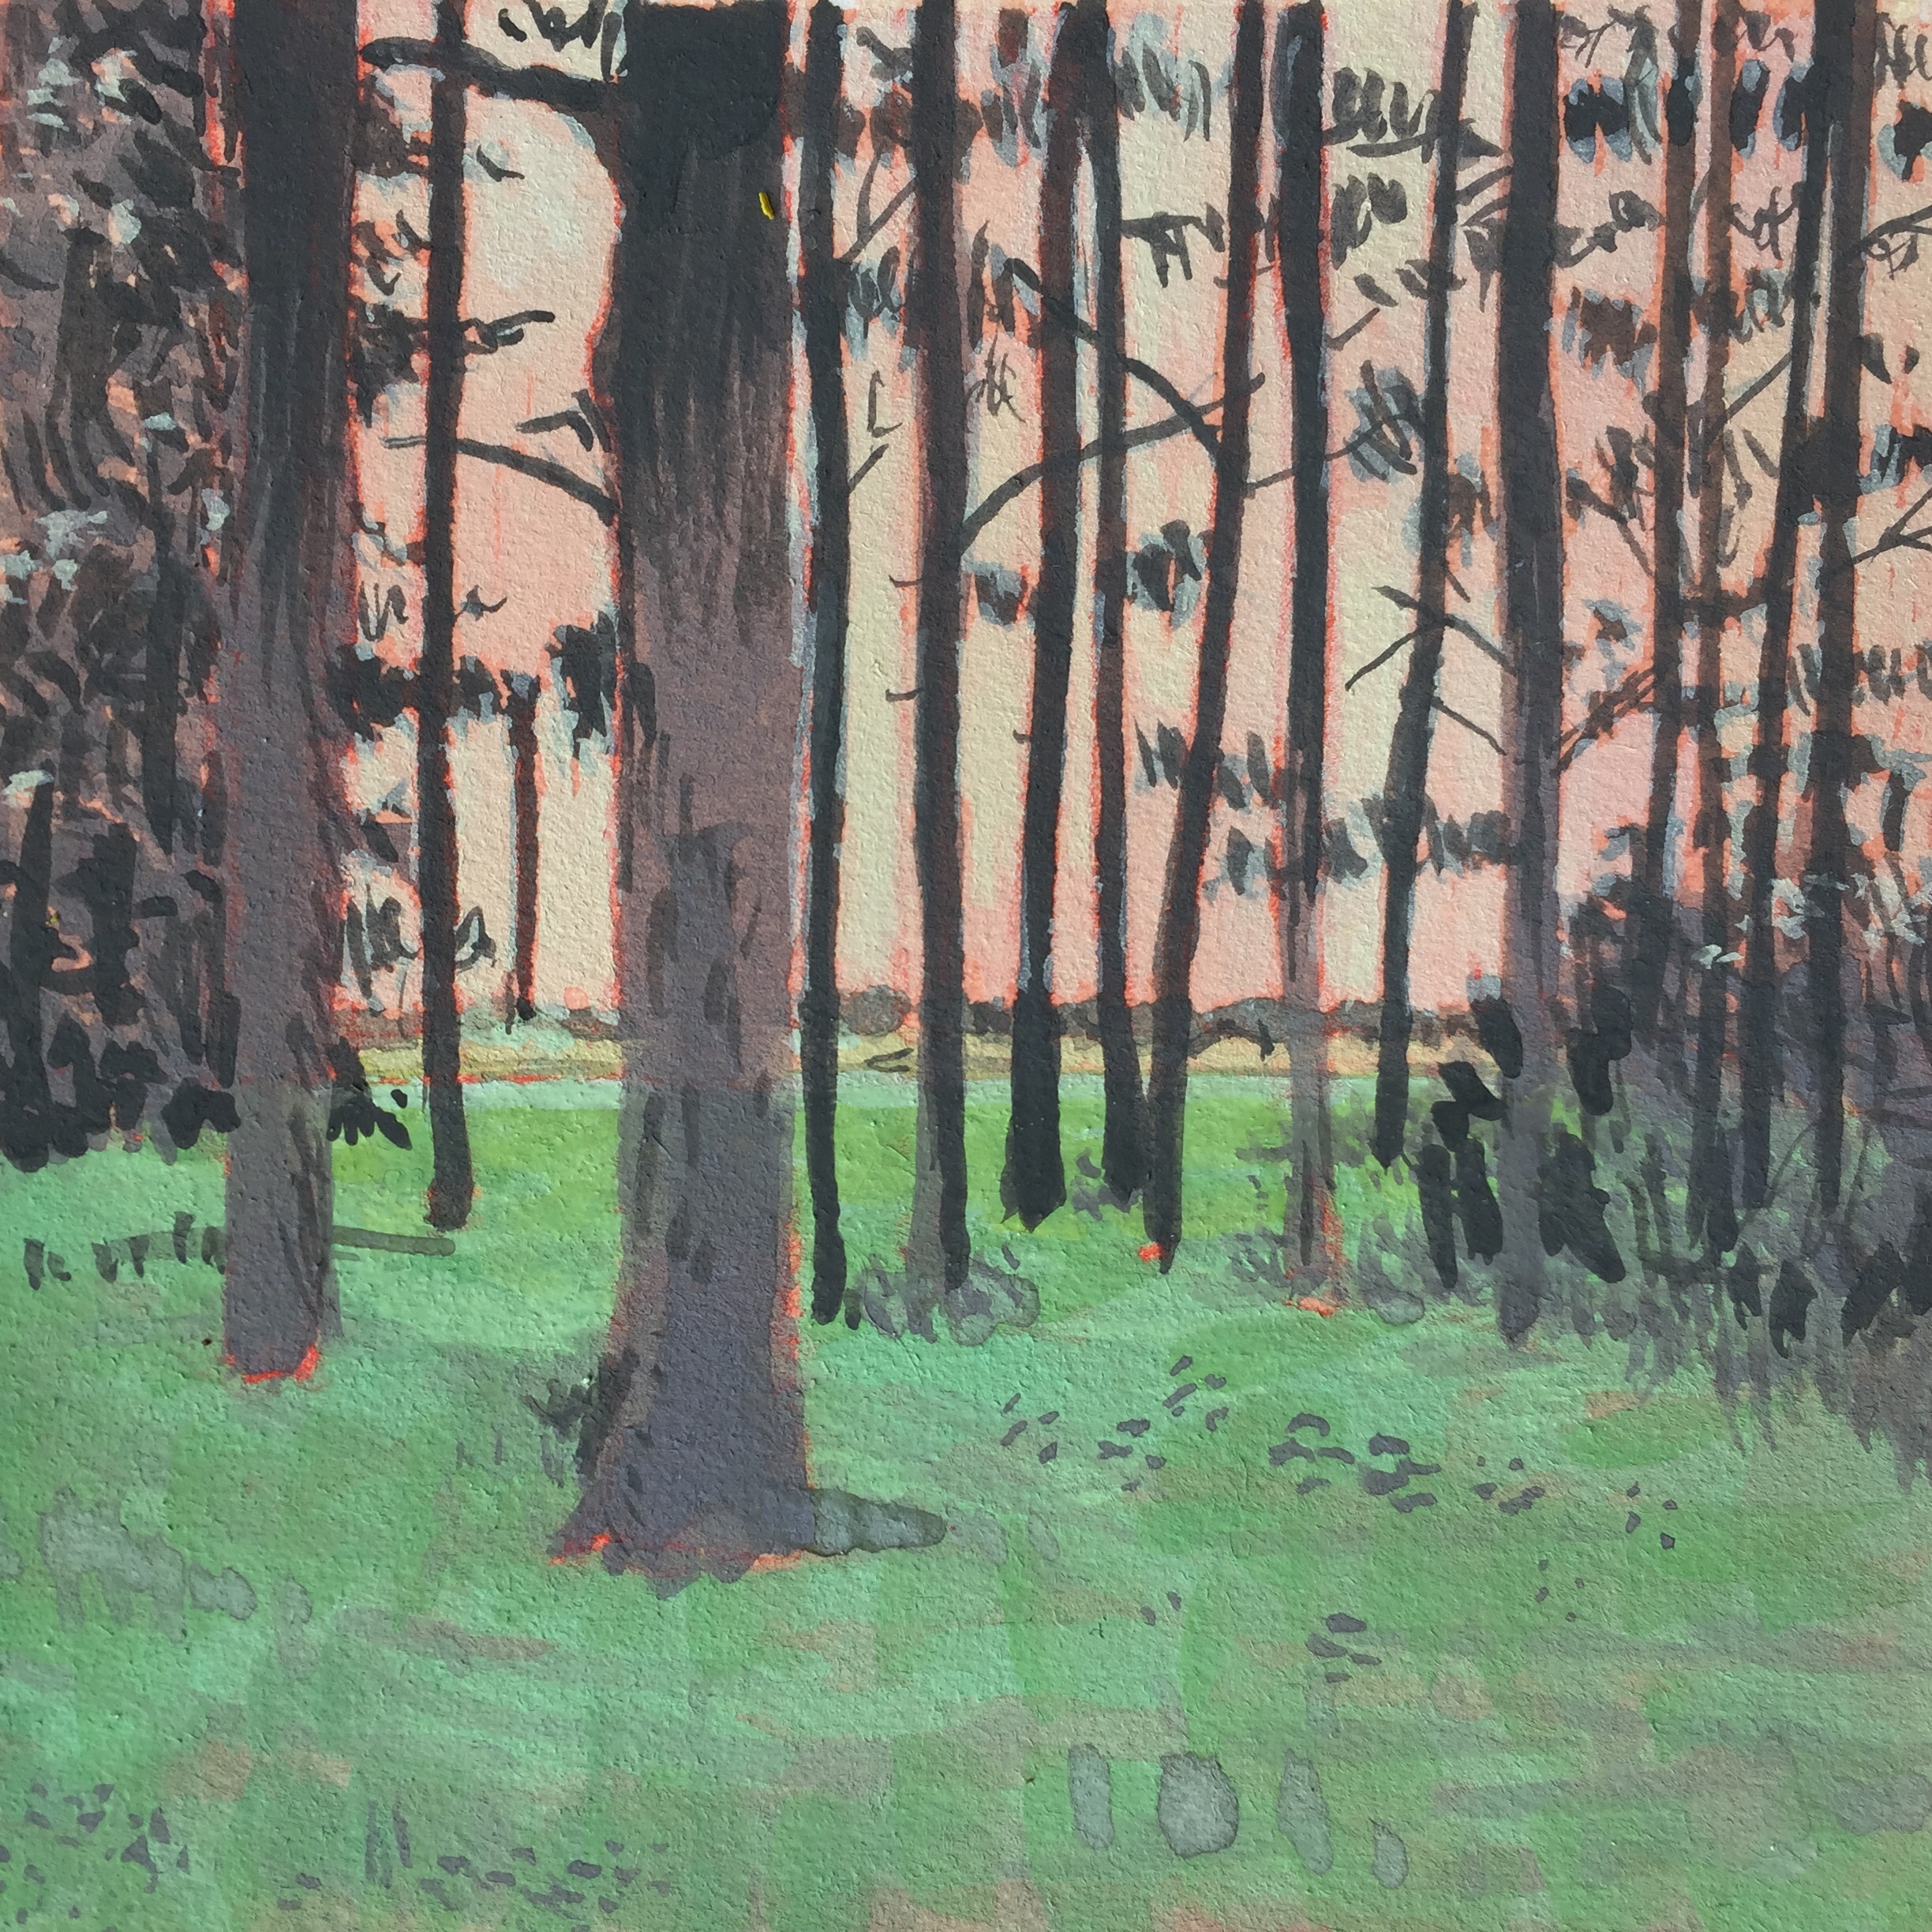 A gouache painting of pine trees at dusk. The sky is sort of pinky-orange-white behind the trees.